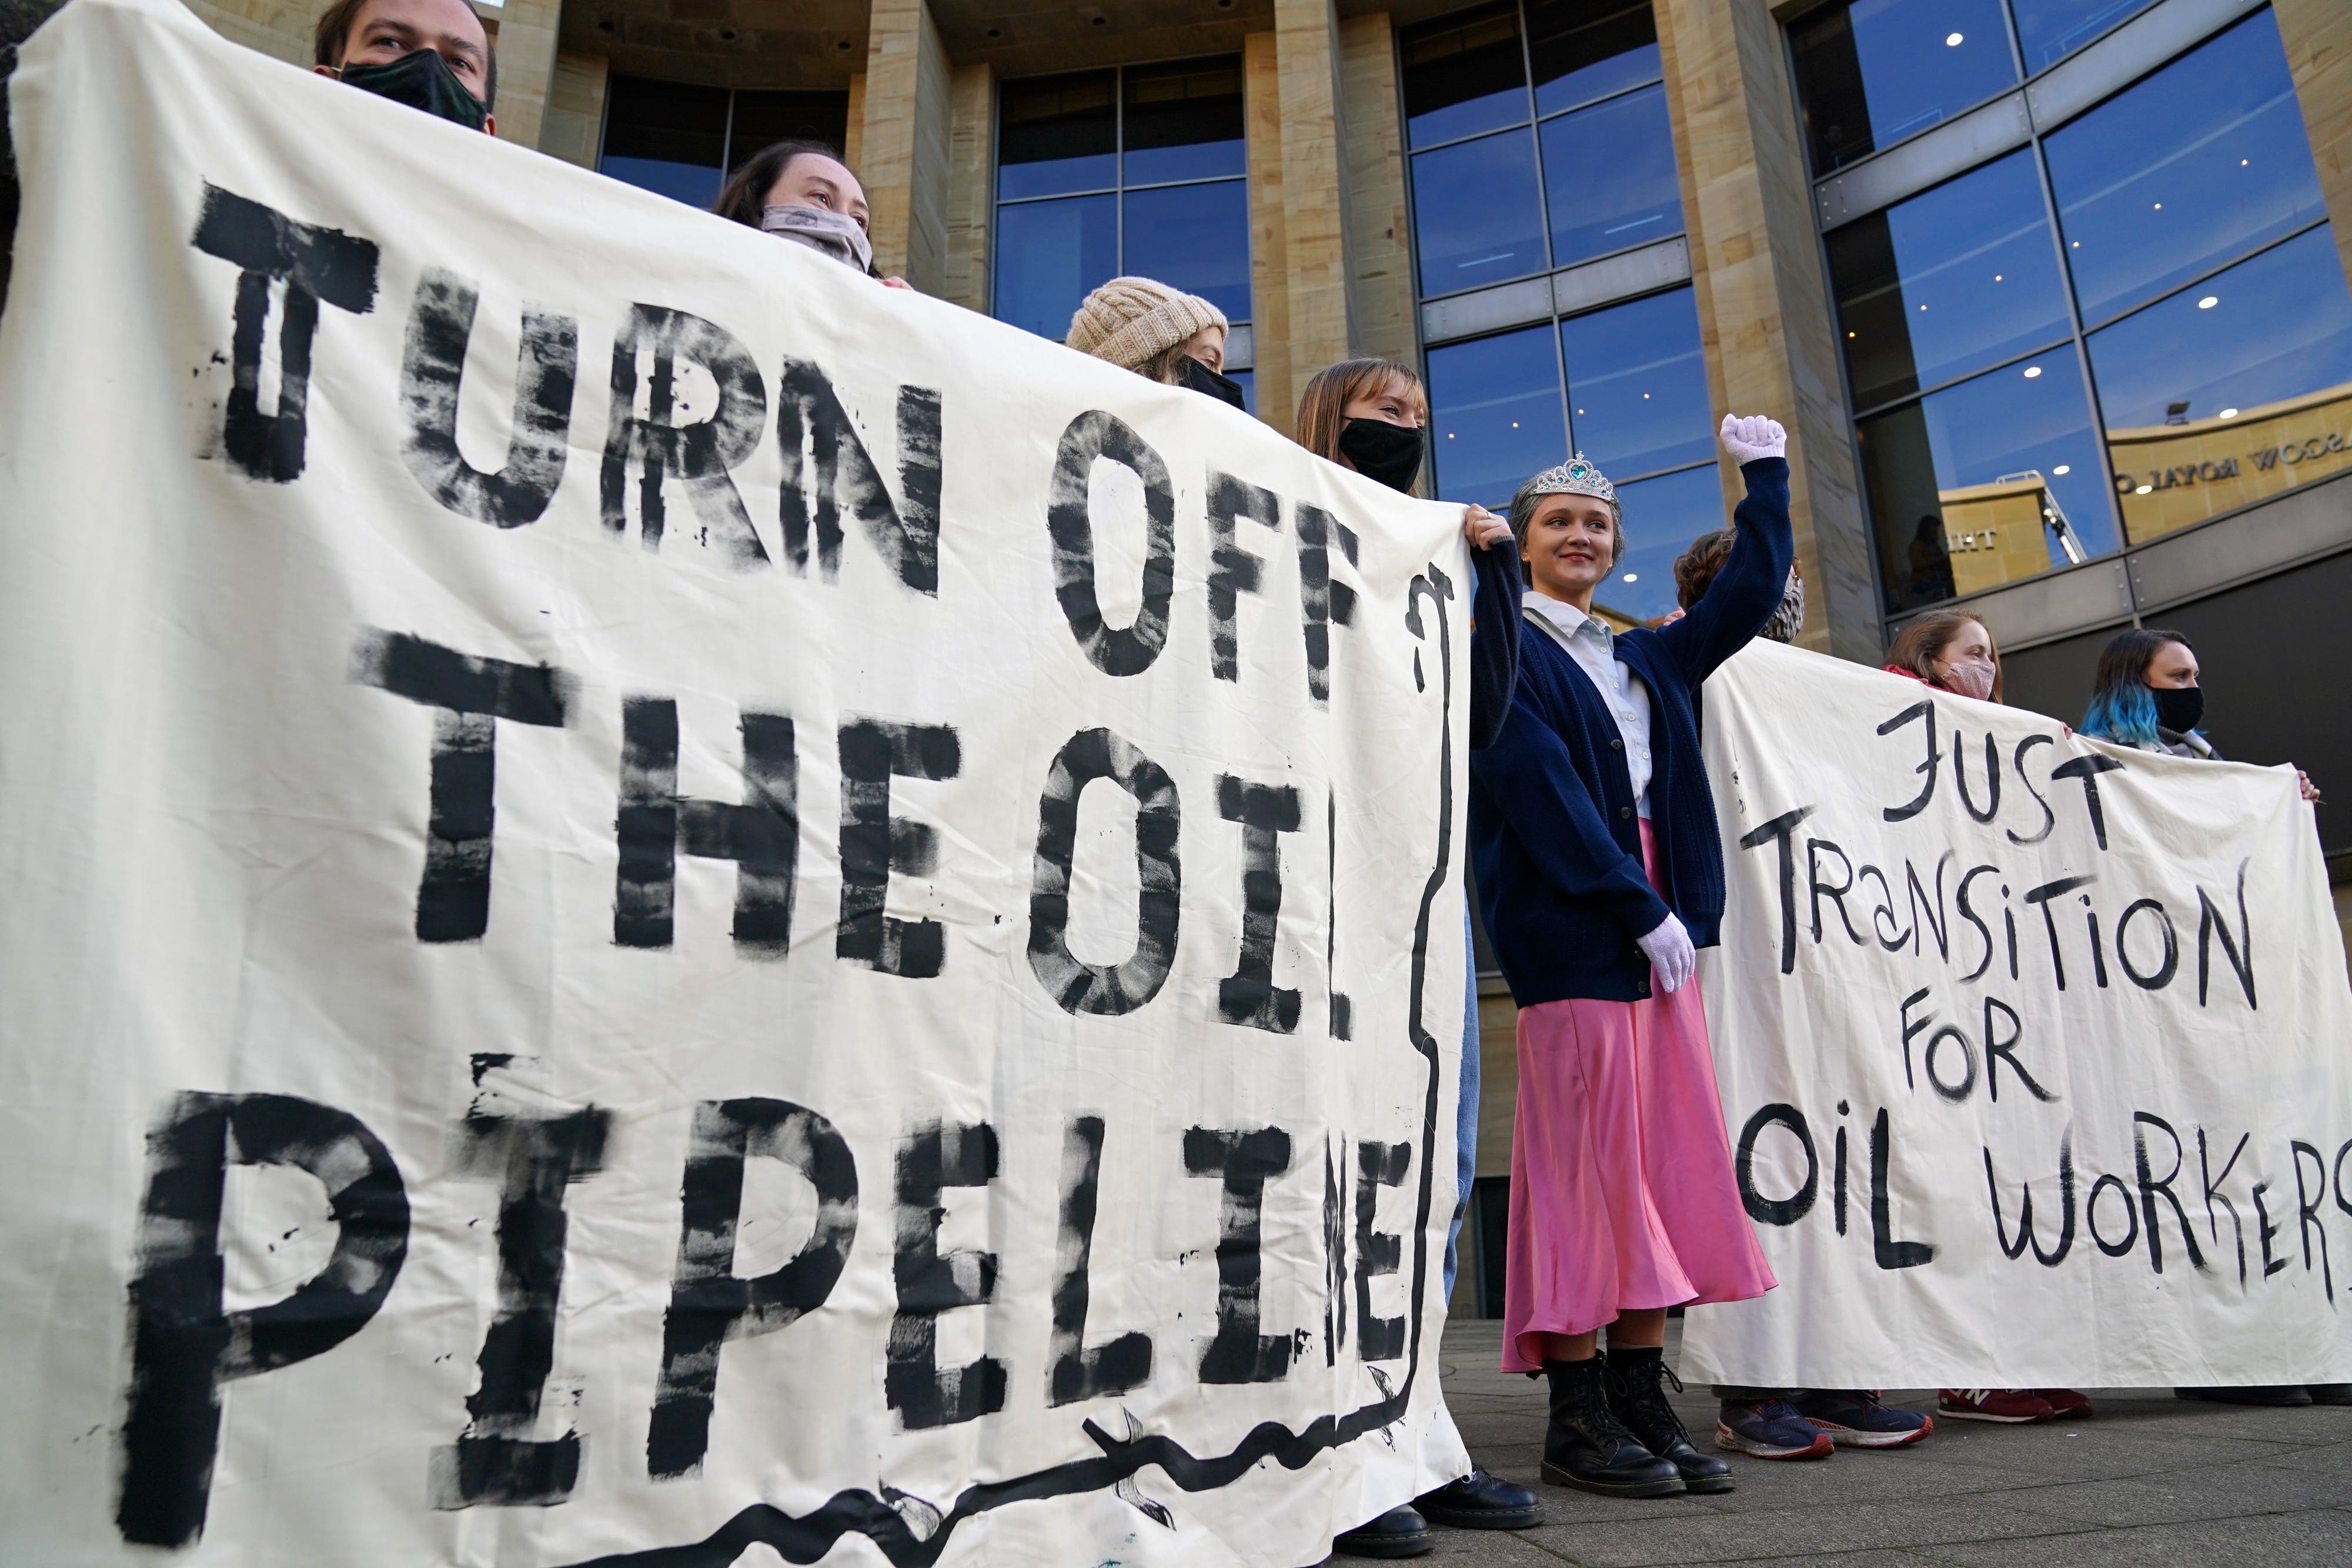 Climate activists oppose the development of new oil fields in the North Sea (Andrew Milligan/PA)